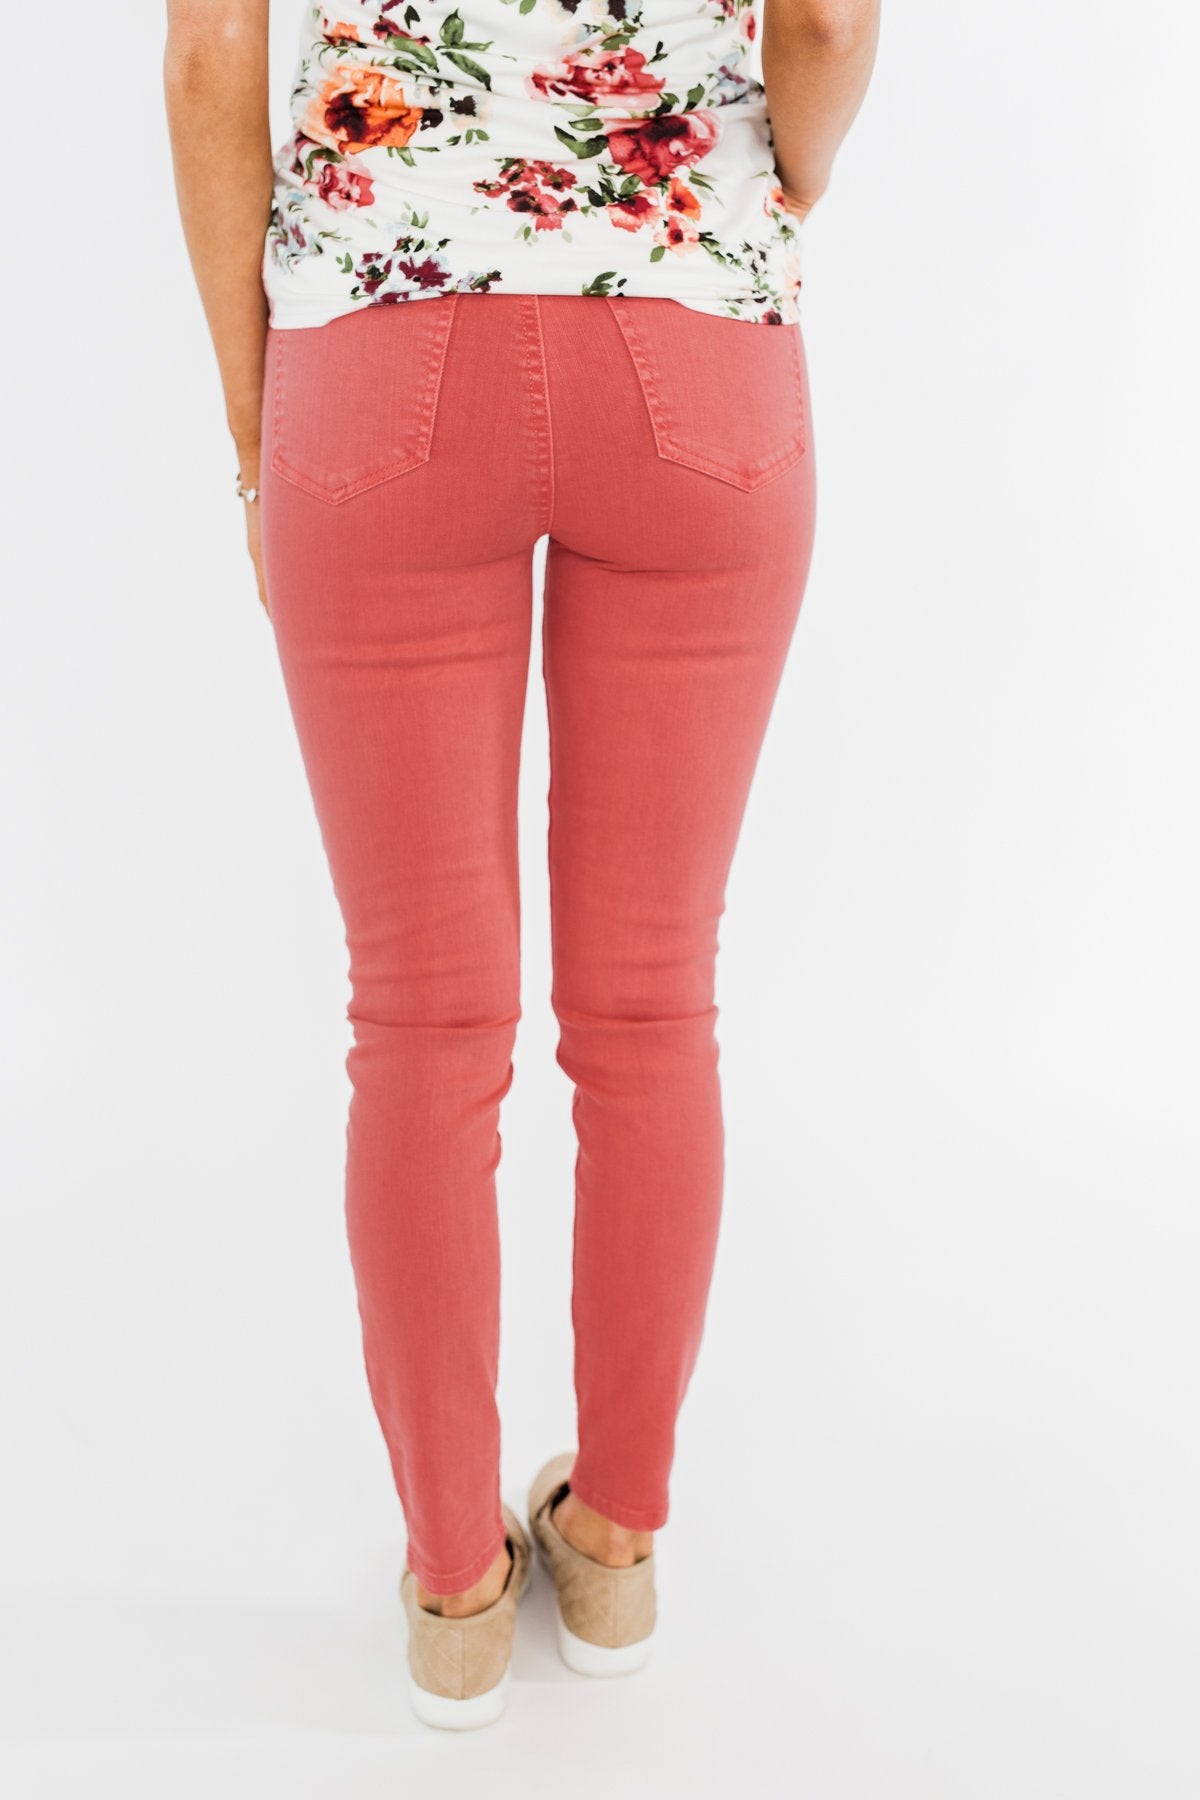 jeans coral